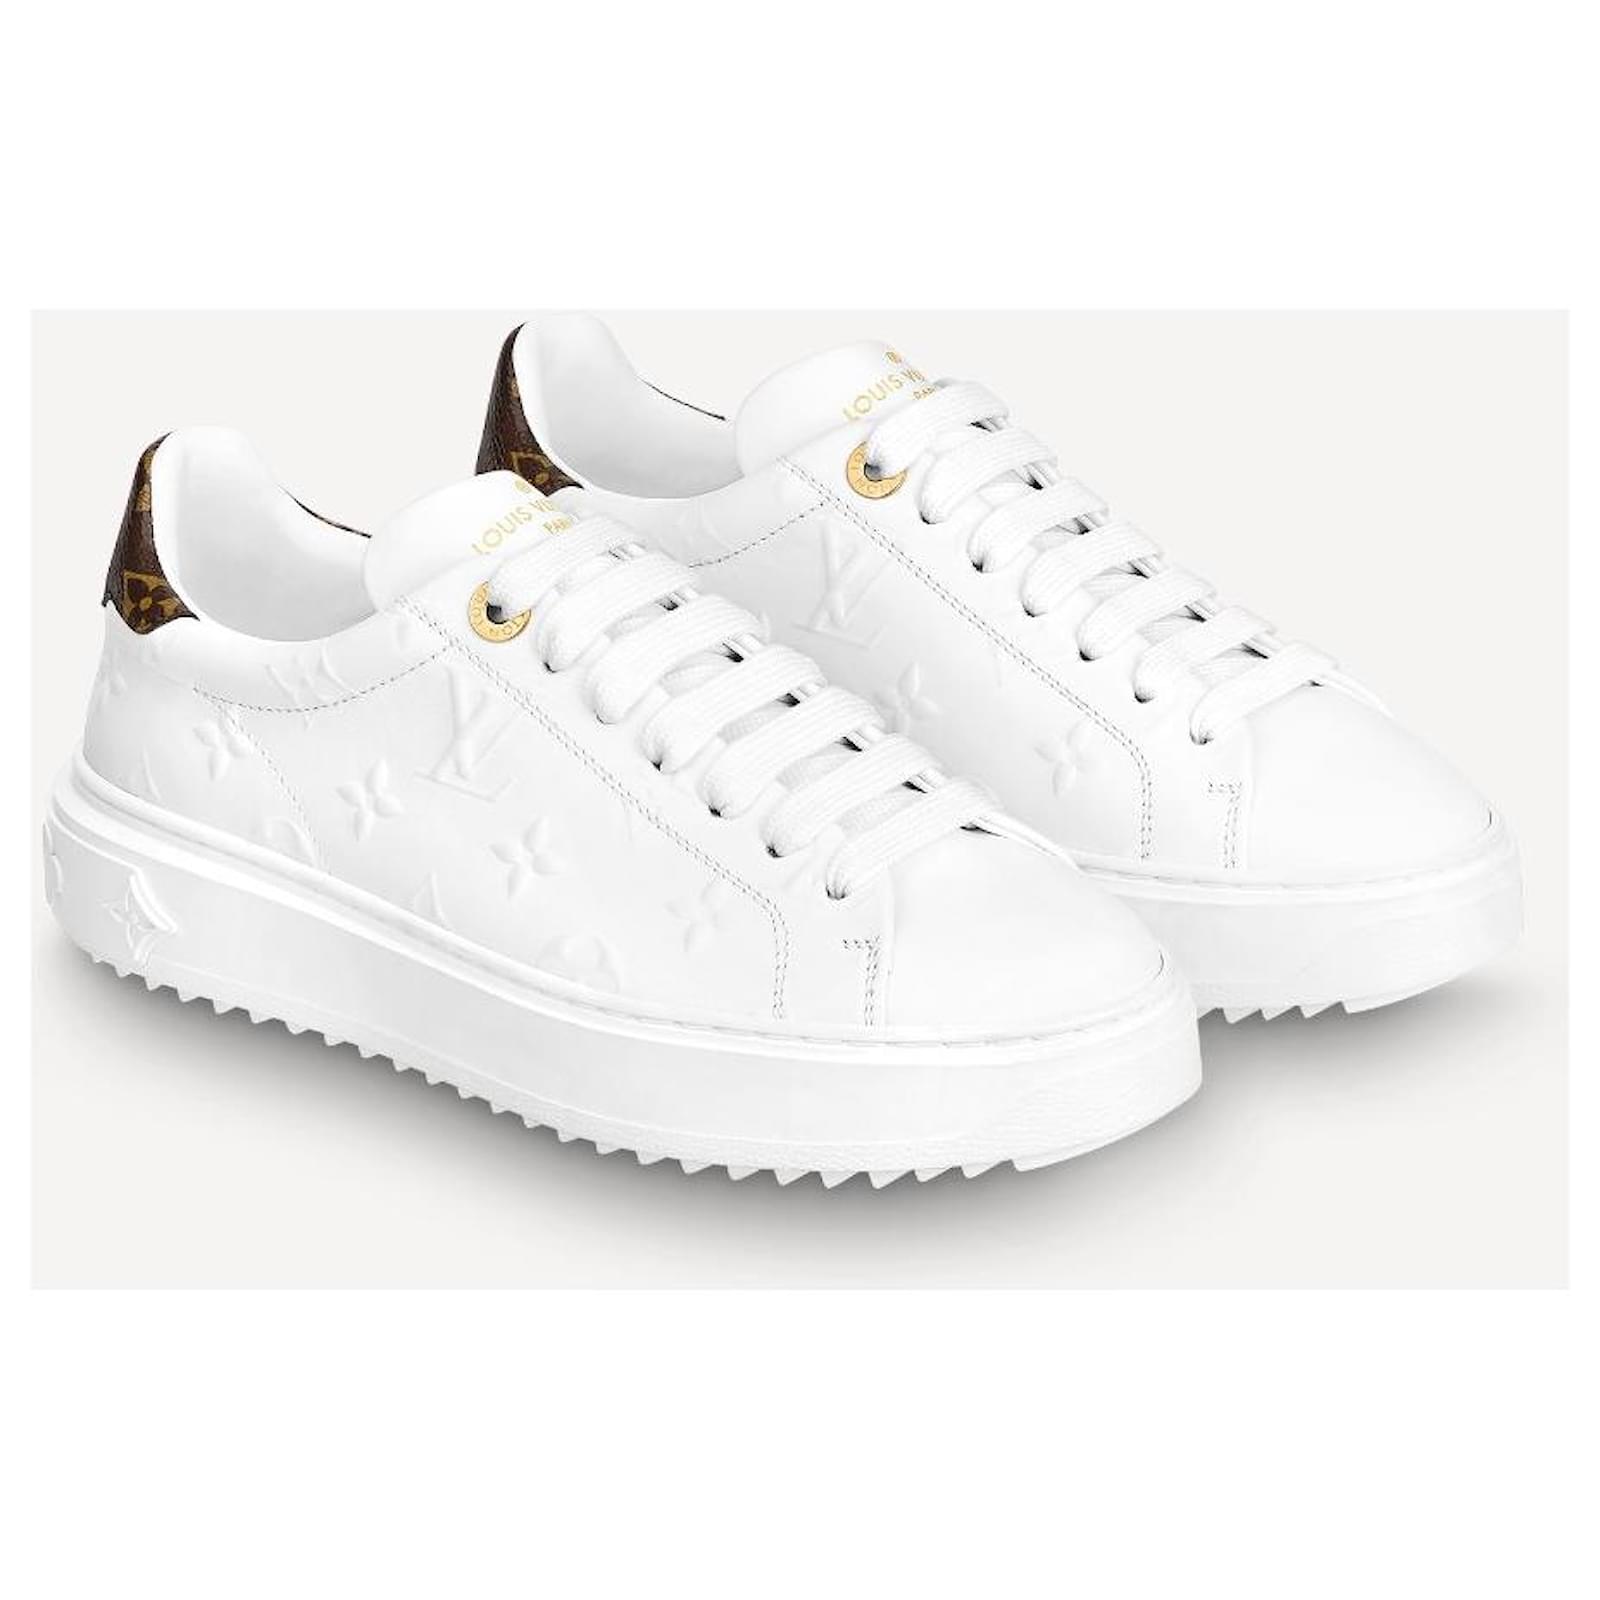 LOUIS VUITTON Calfskin Time Out New Wave Sneakers 40 White 1199358